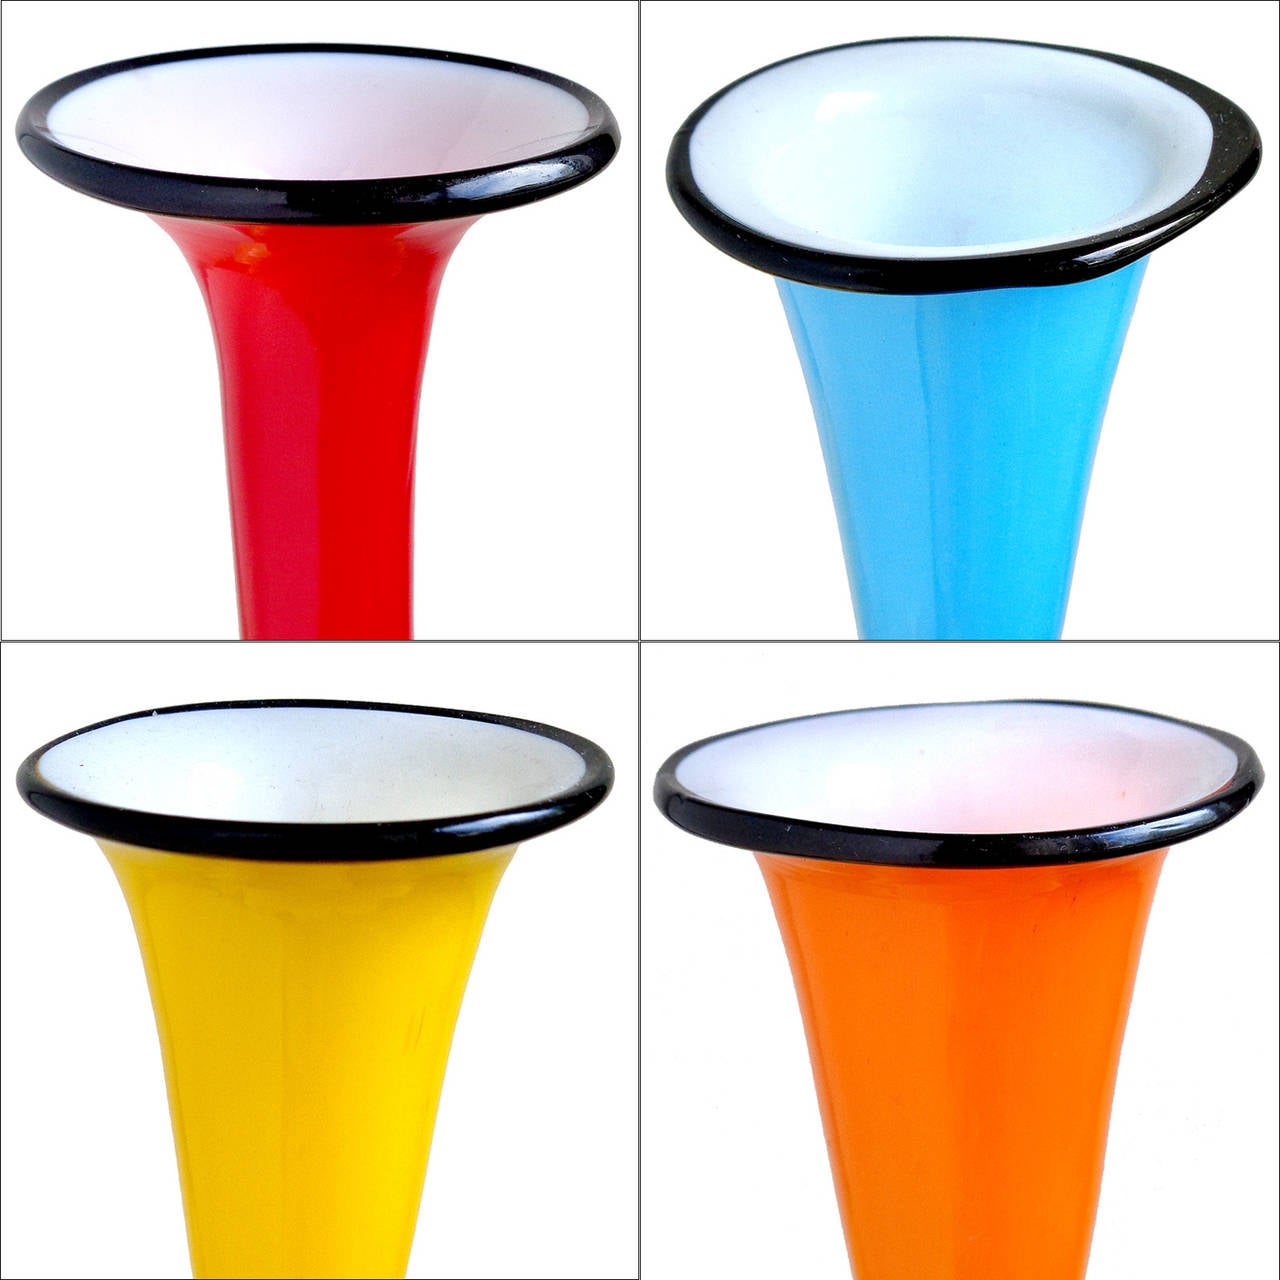 Free shipping worldwide! See details below description.

Cool and bright set of Murano handblown cased red, blue, yellow and orange over white art glass flower vases. Documented to the Fratelli Toso Company, circa 1930s-1940s. Each has a black rim